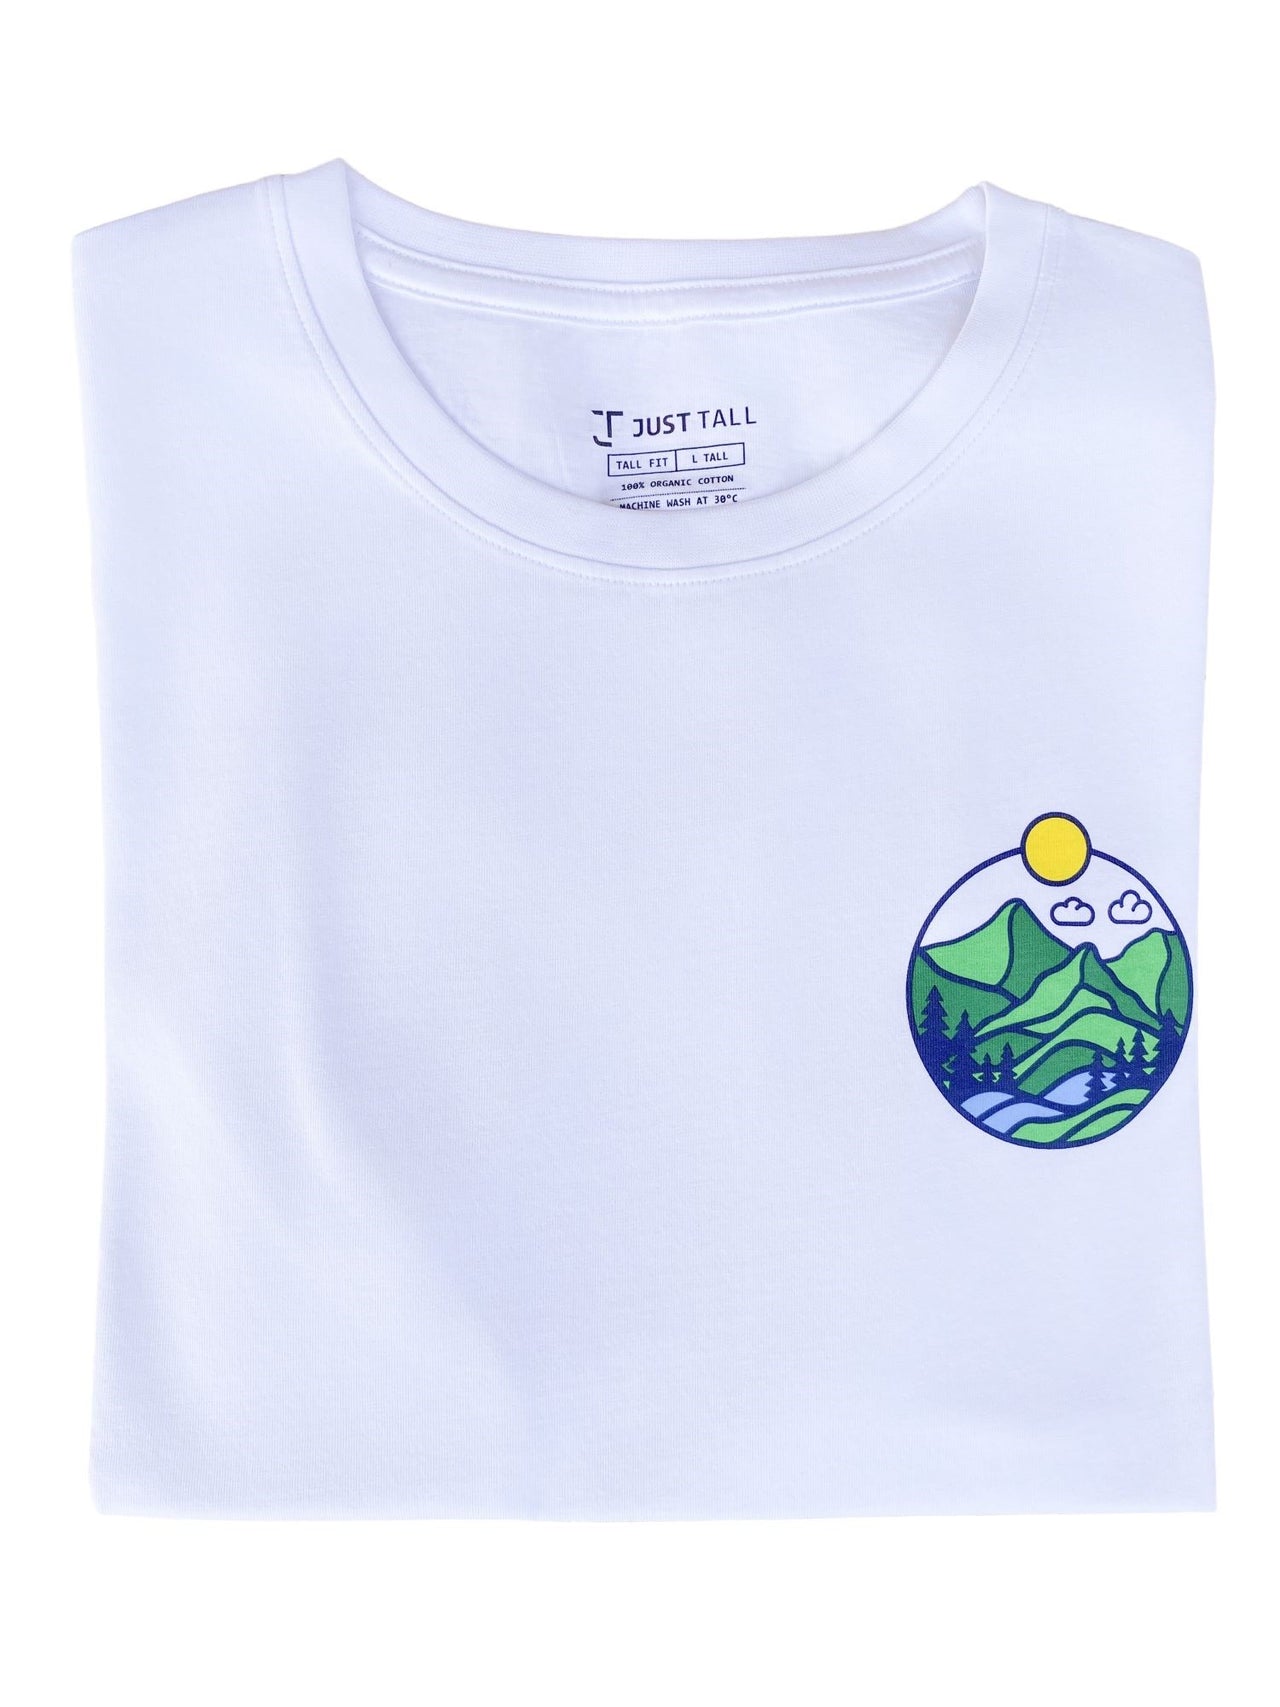 A close up of a tall white graphic t-shirt.